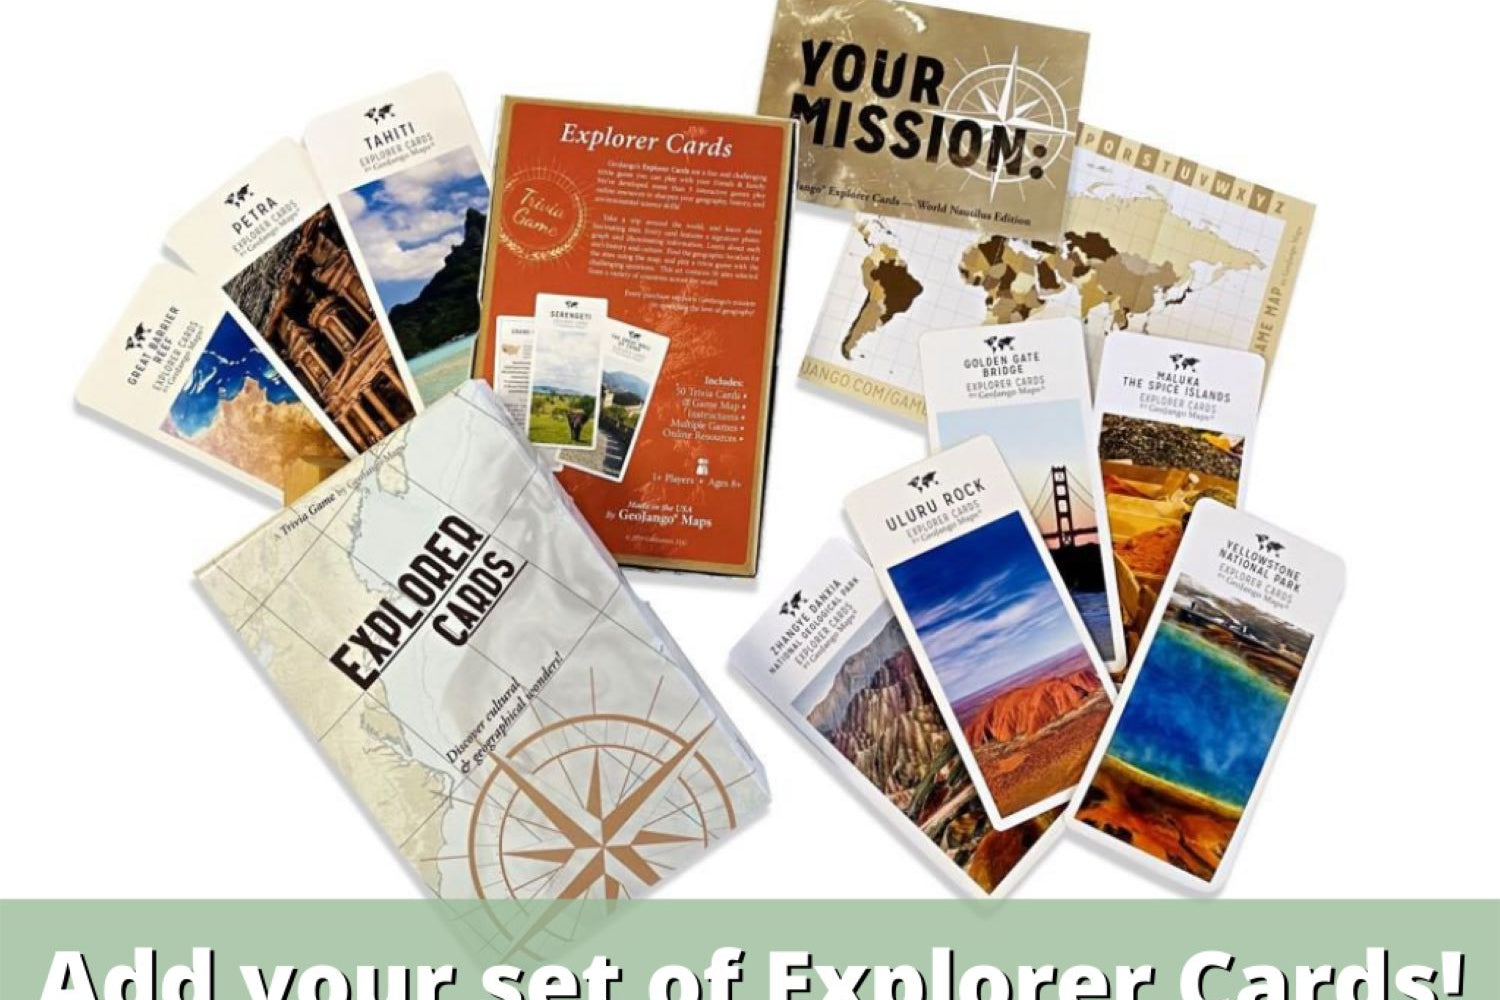 Enhance your educational journey with the Explorer Cards game set, guiding you through the world wonders you will find on your world travel map.